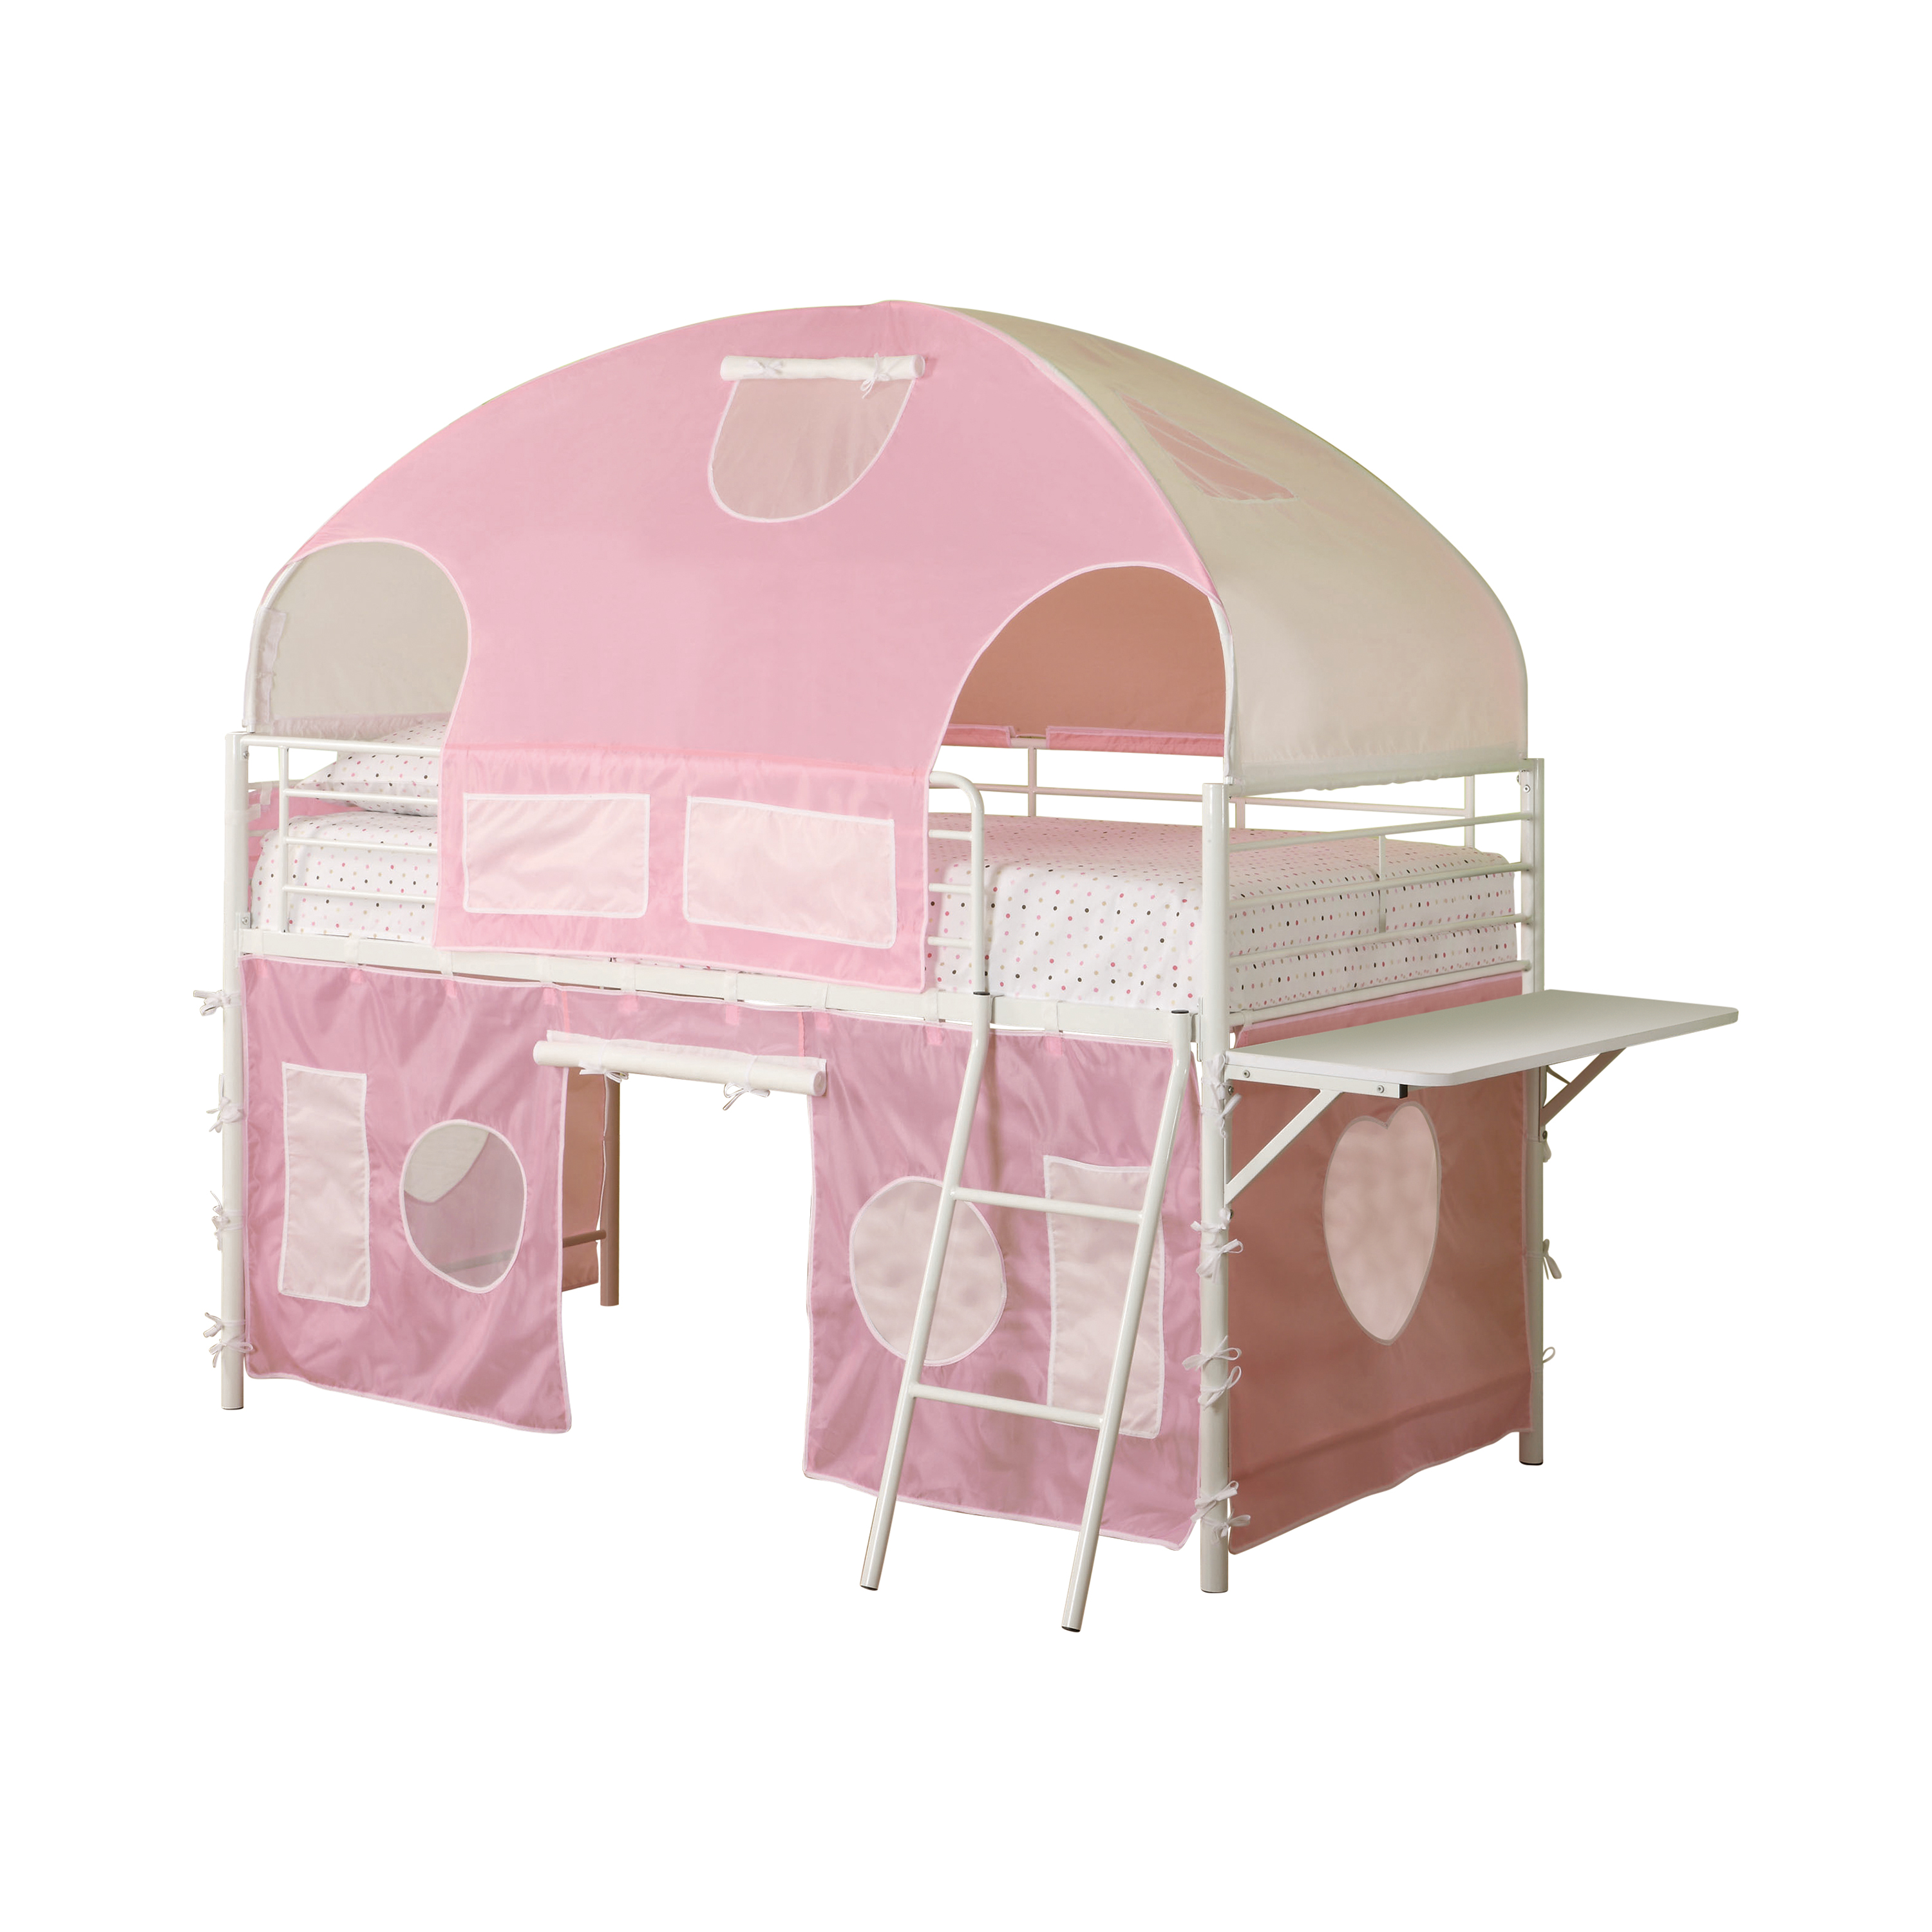 Sweetheart Tent Loft Bed Pink and White - image 2 of 4